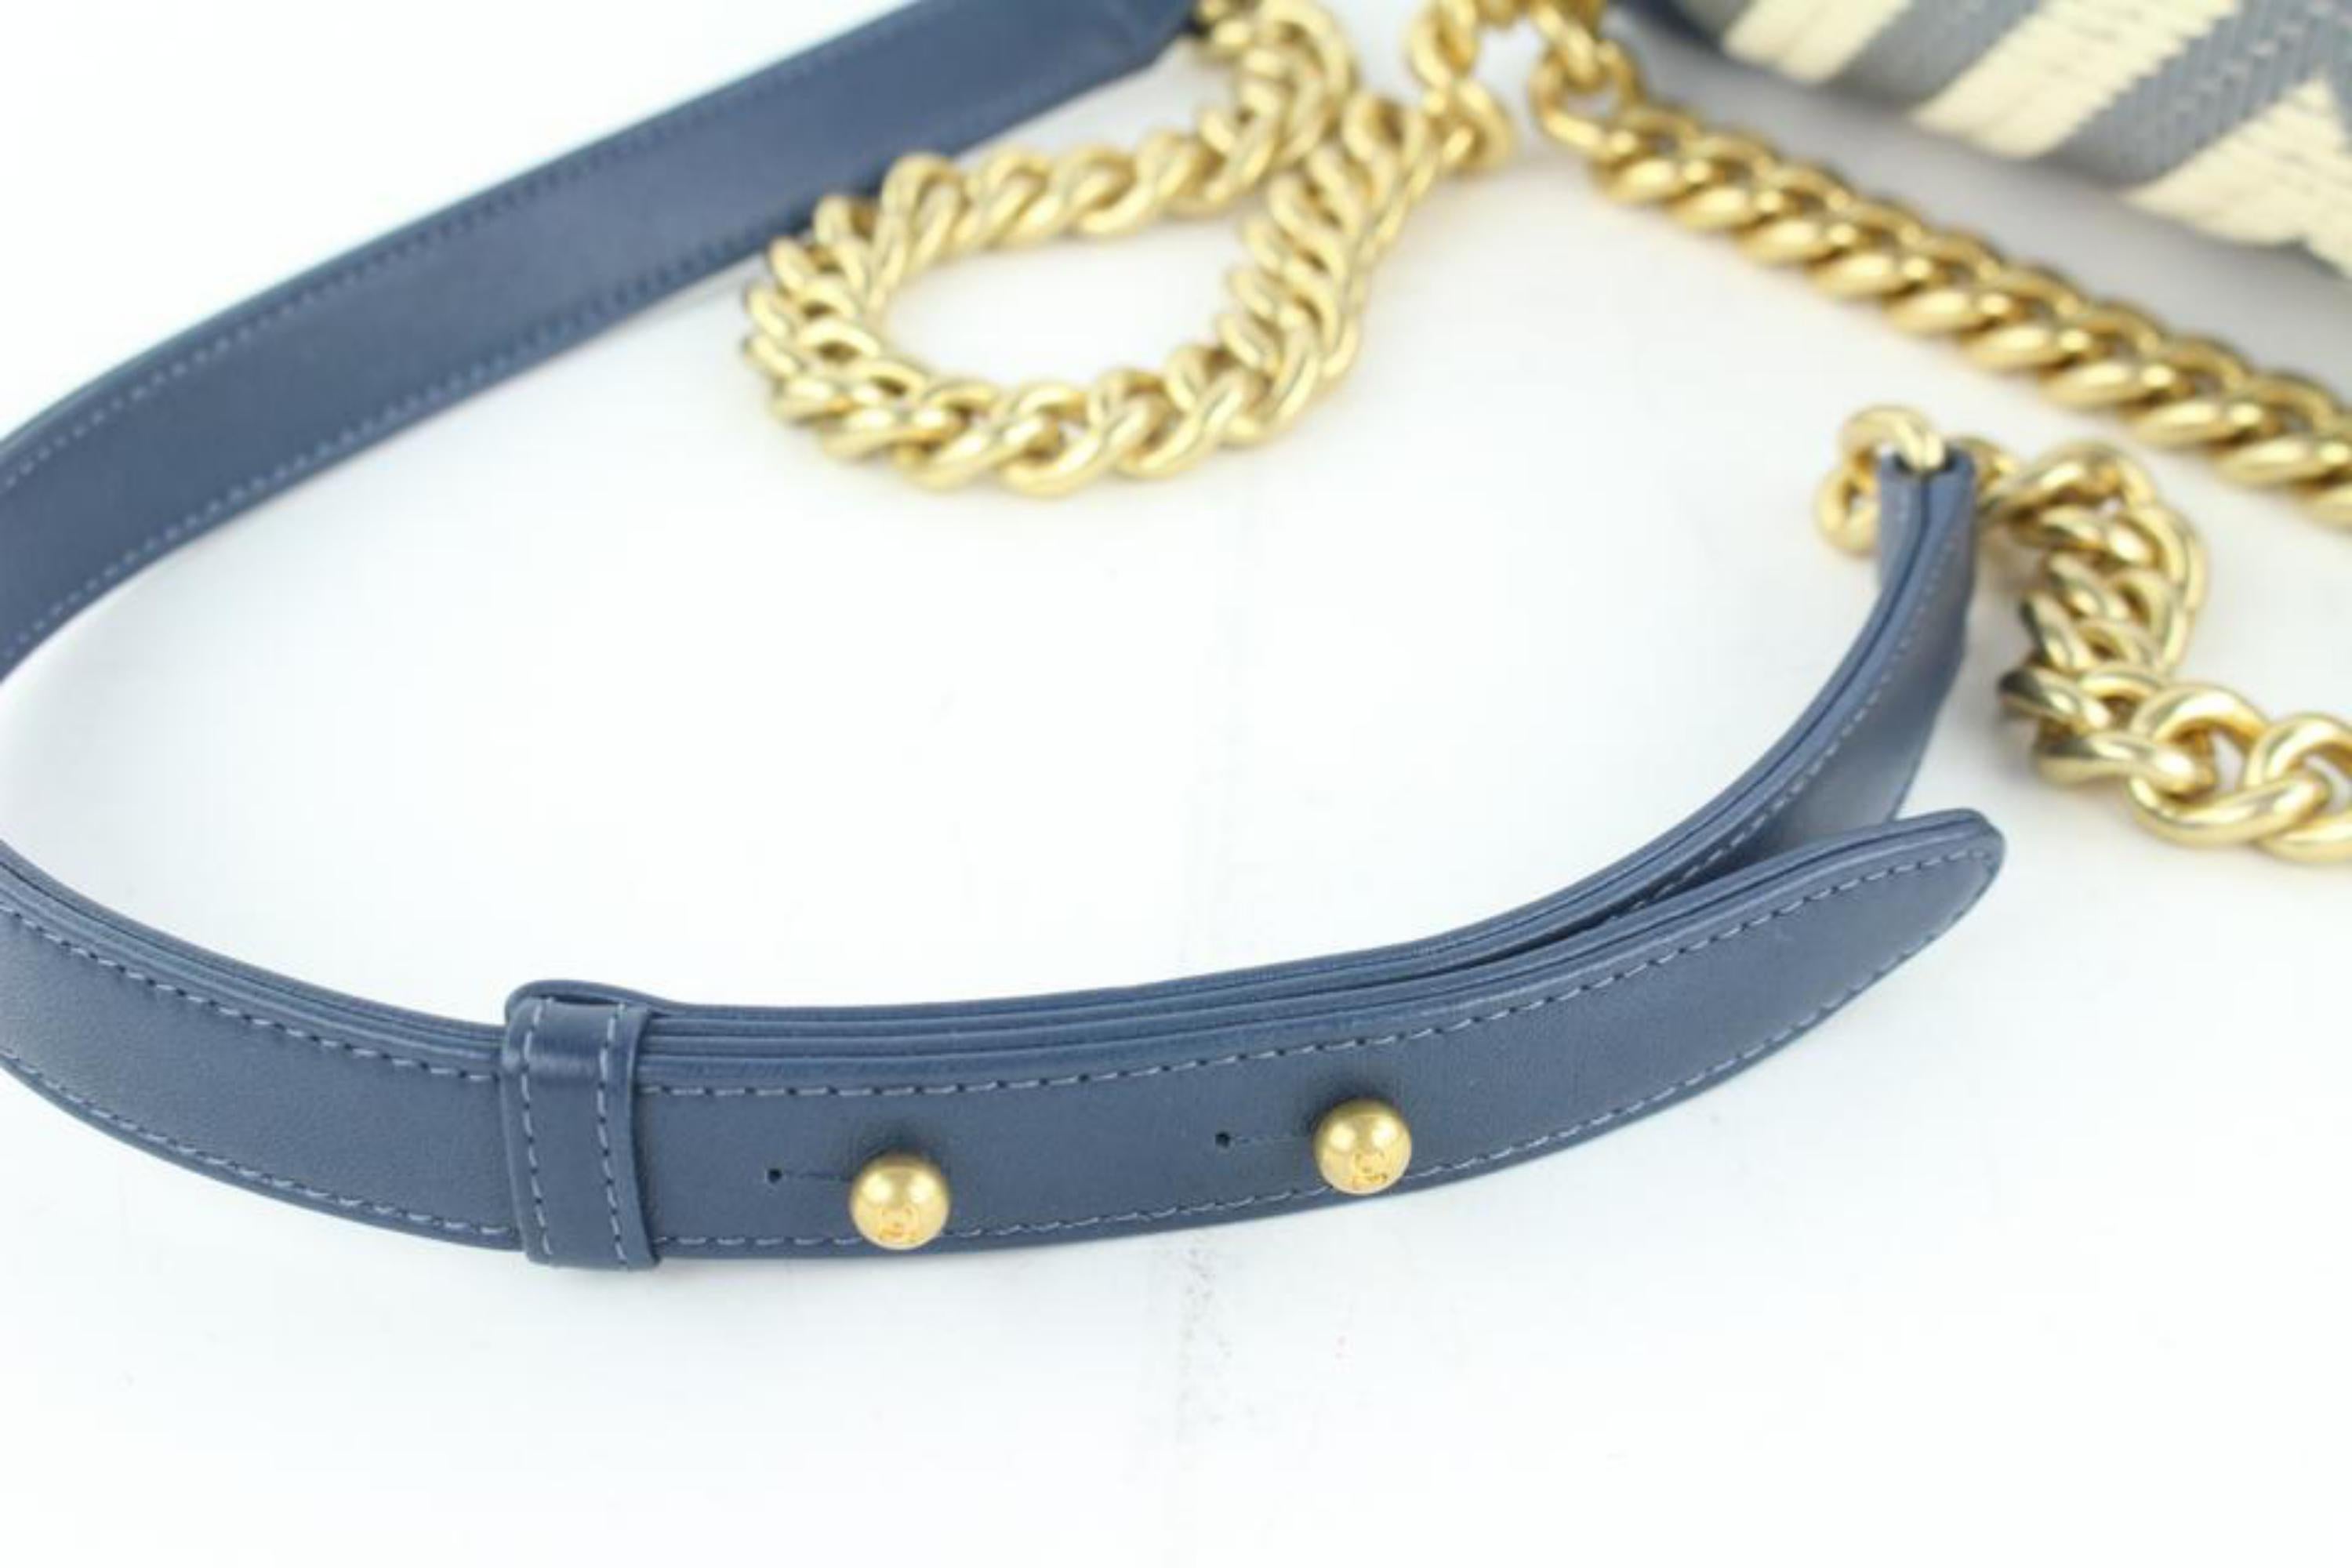 Chanel Boy (Rare) Limited Edition Chevron 2cz1812 Blue Leather Cross Body Bag For Sale 3